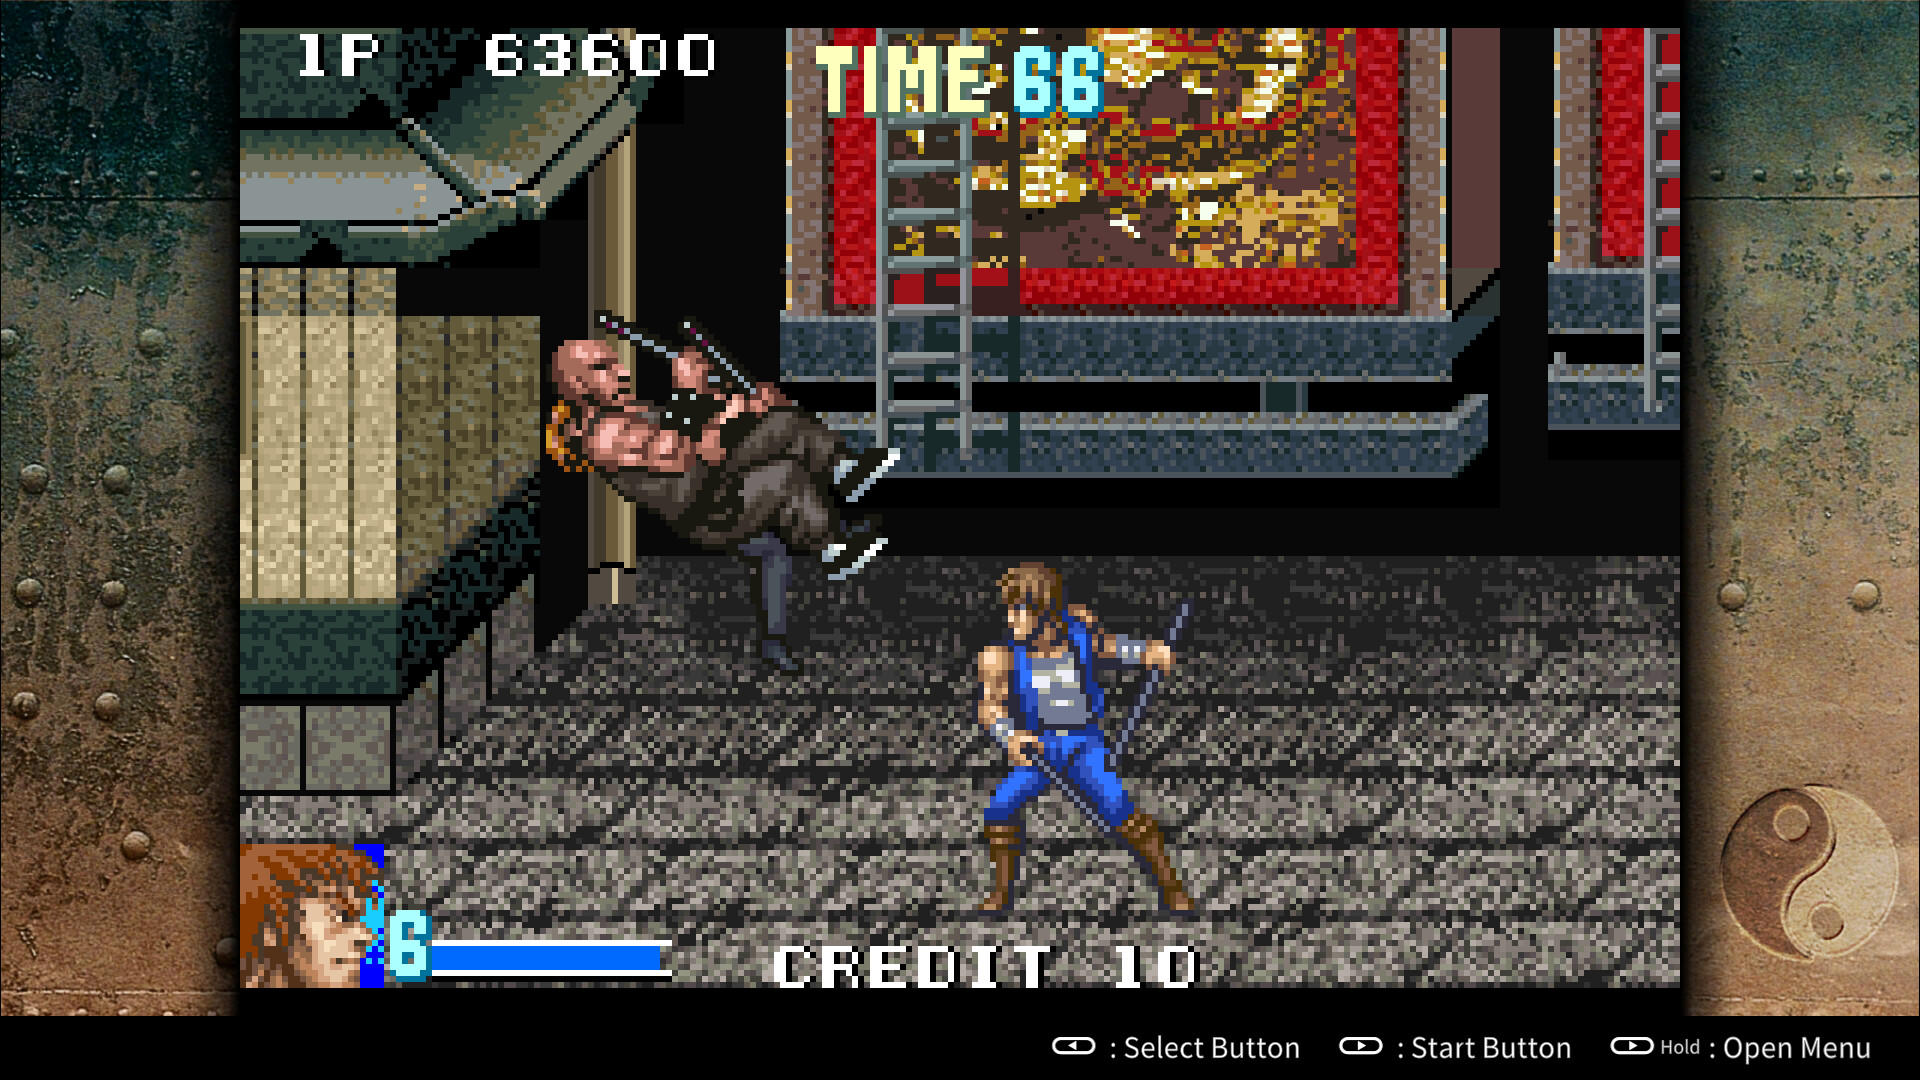 Double Dragon Advance mobile android iOS-TapTap